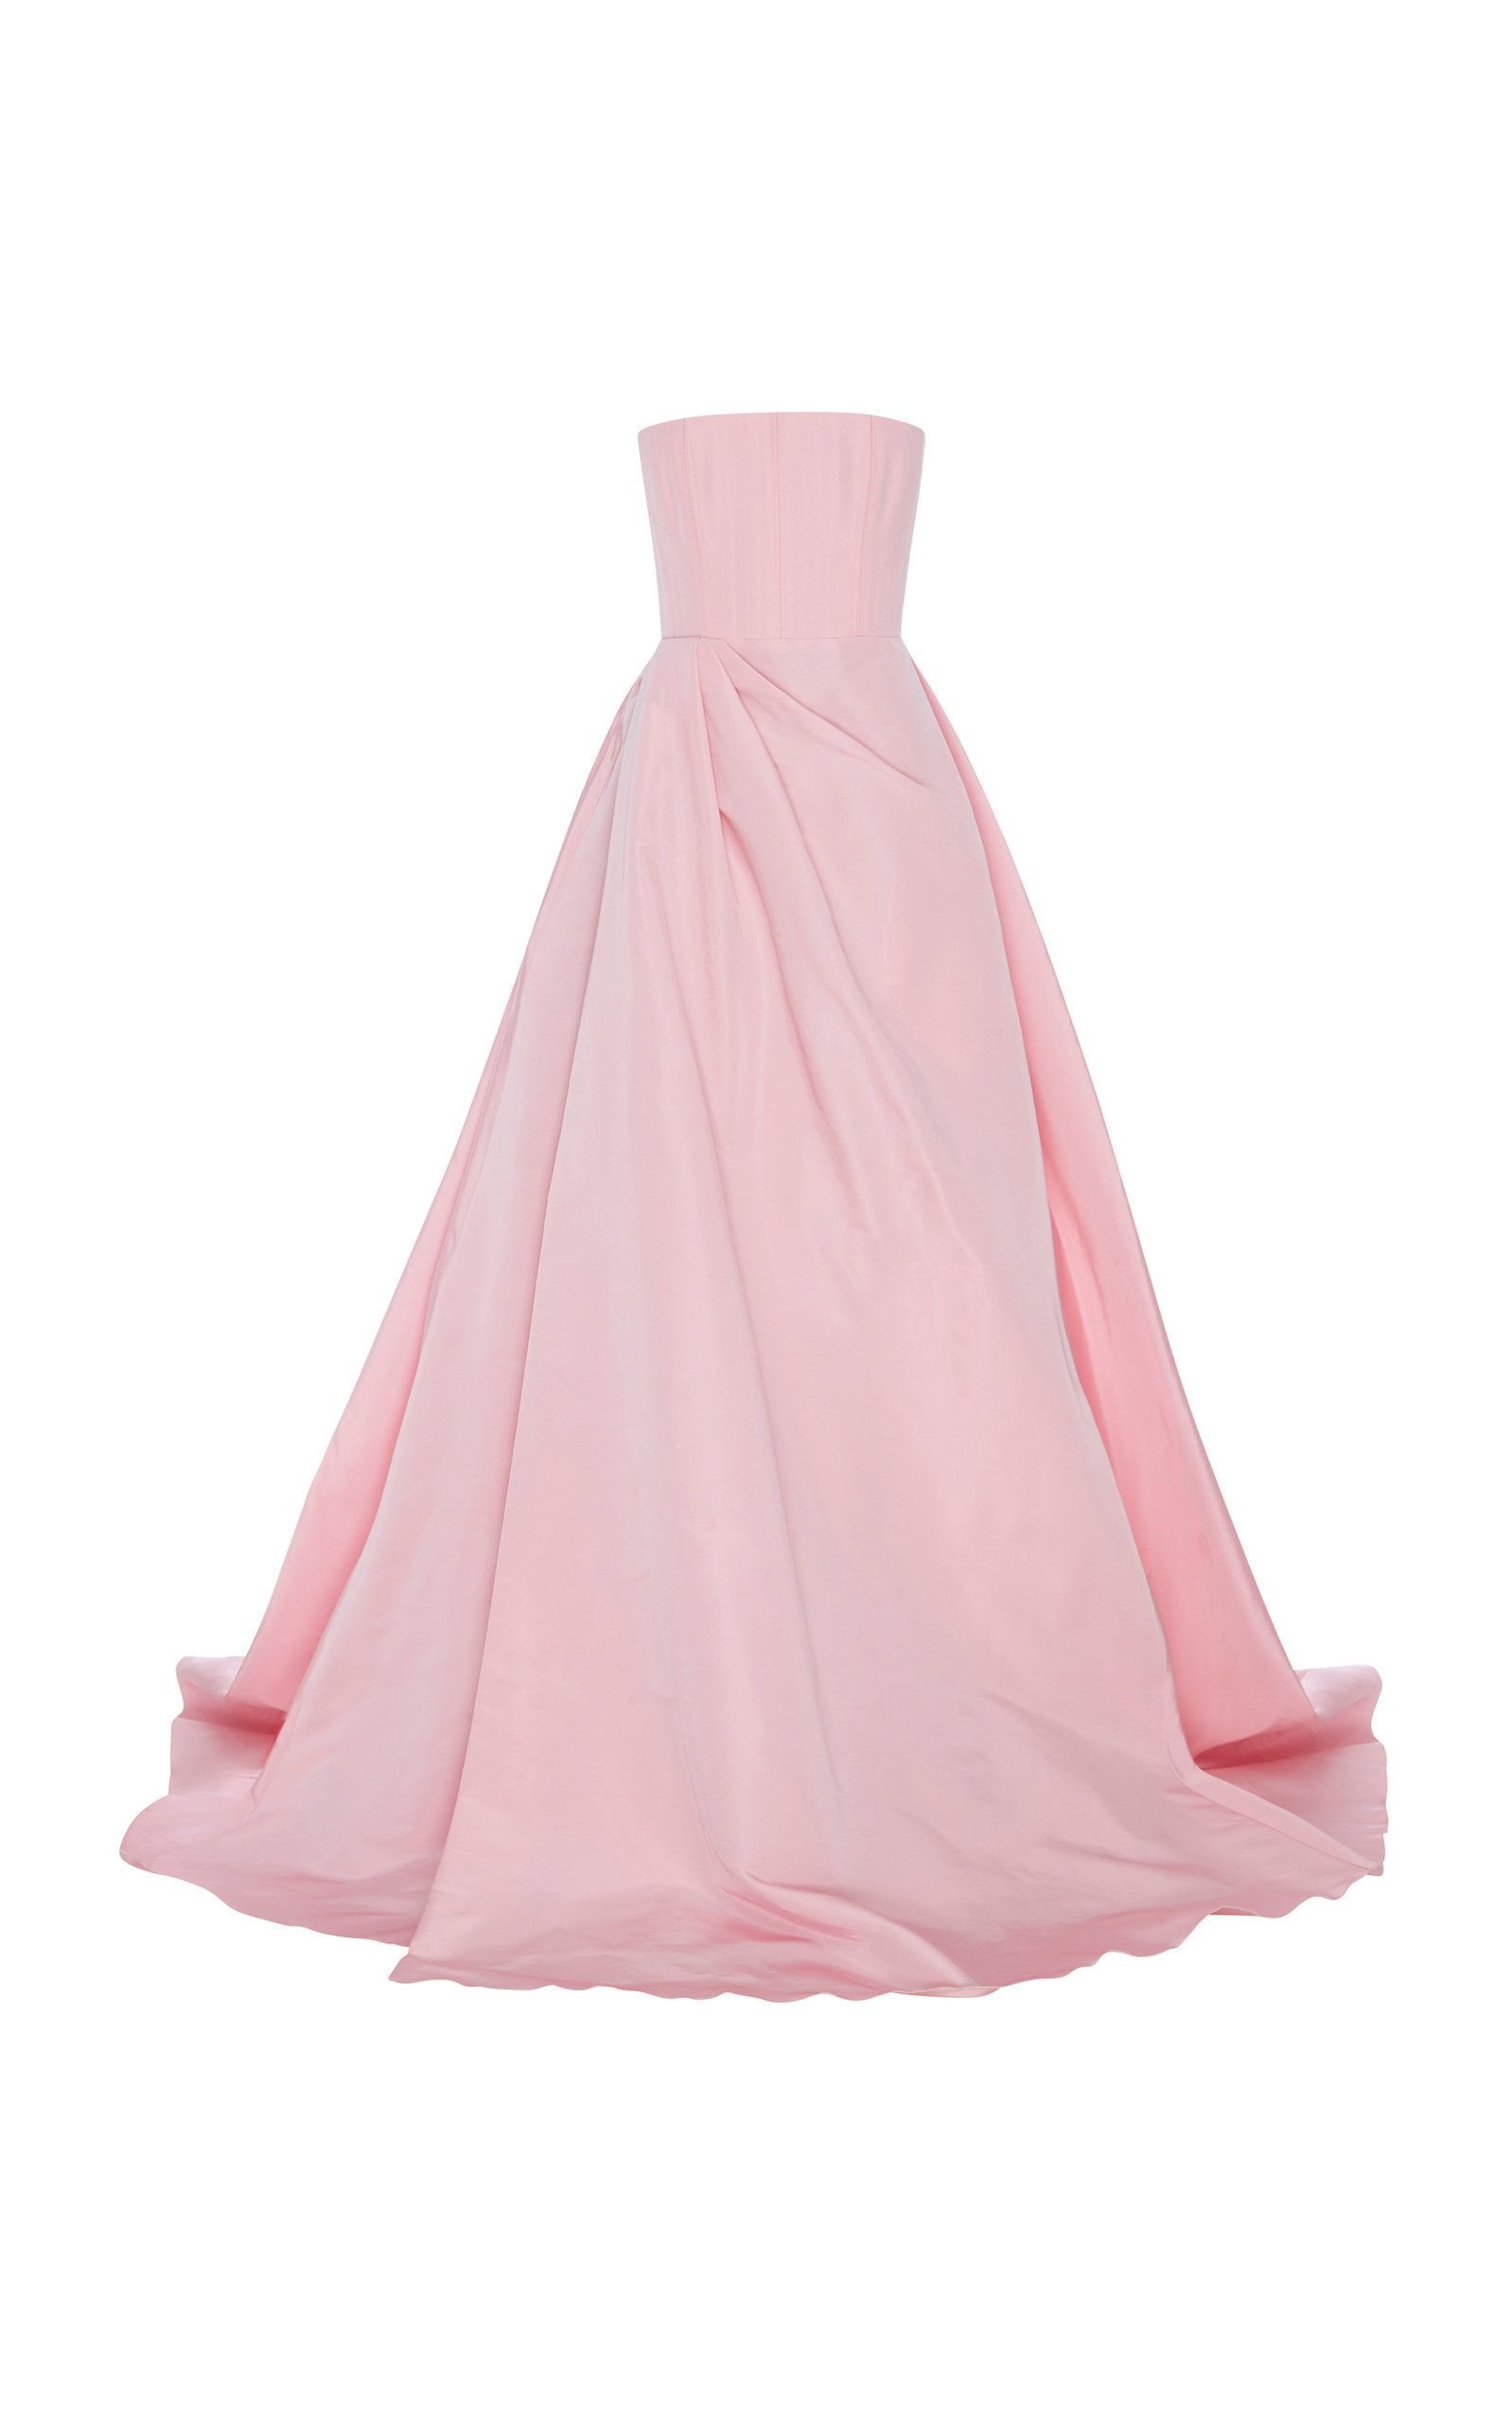 casual pink wedding dresses